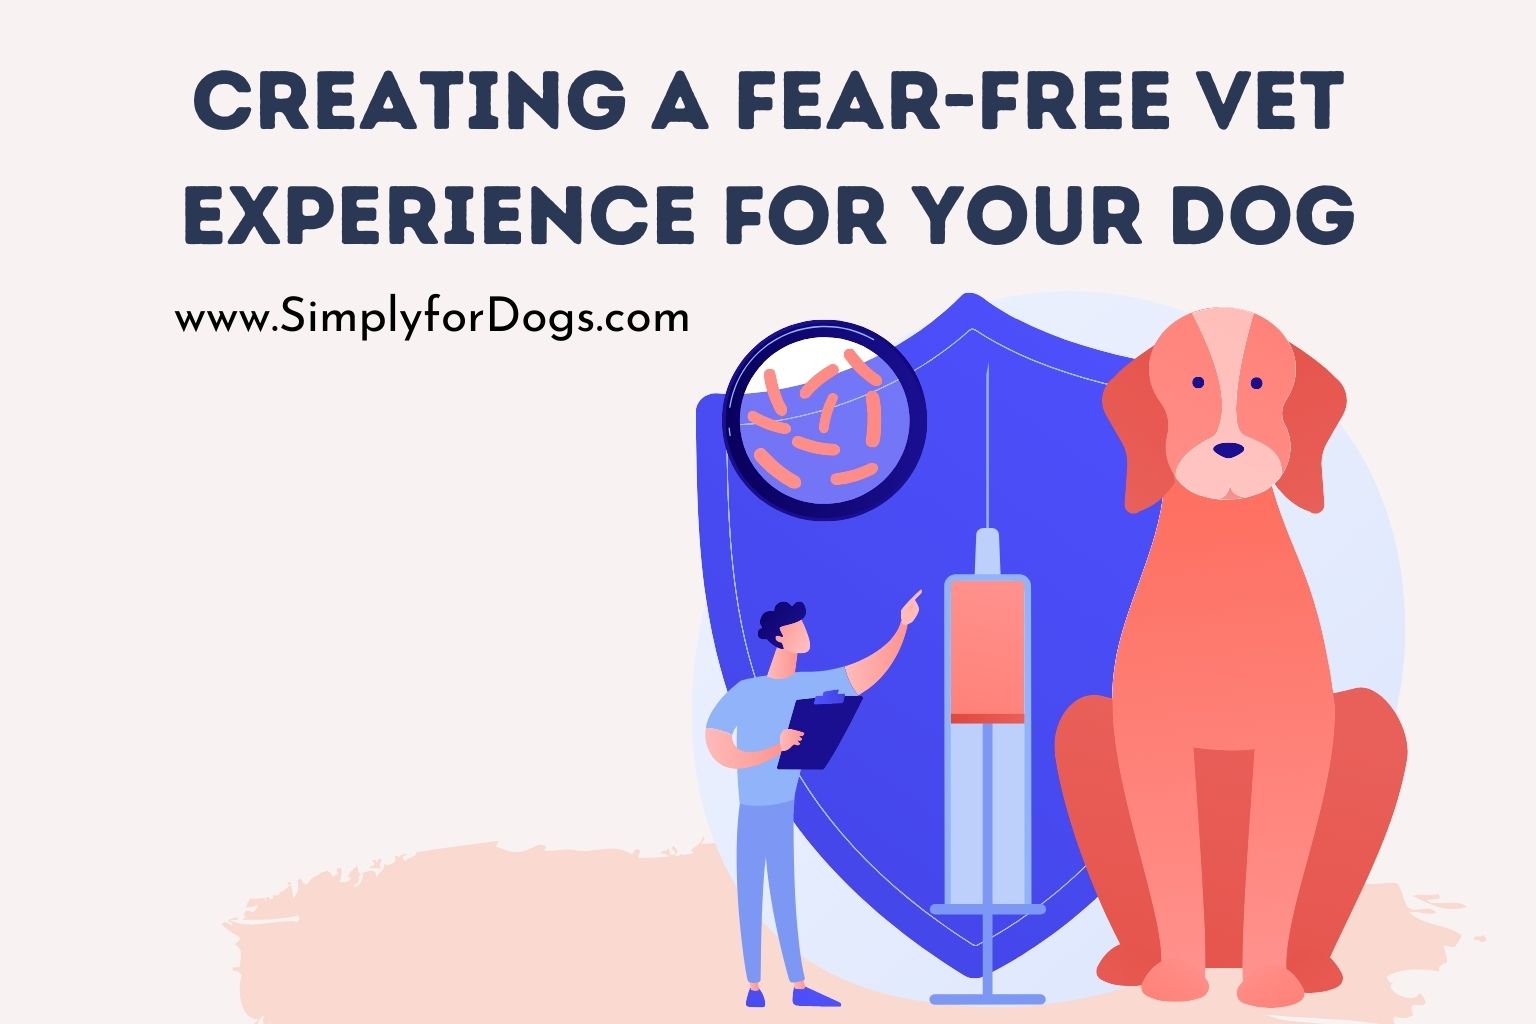 Creating a Fear-Free Vet Experience for Your Dog